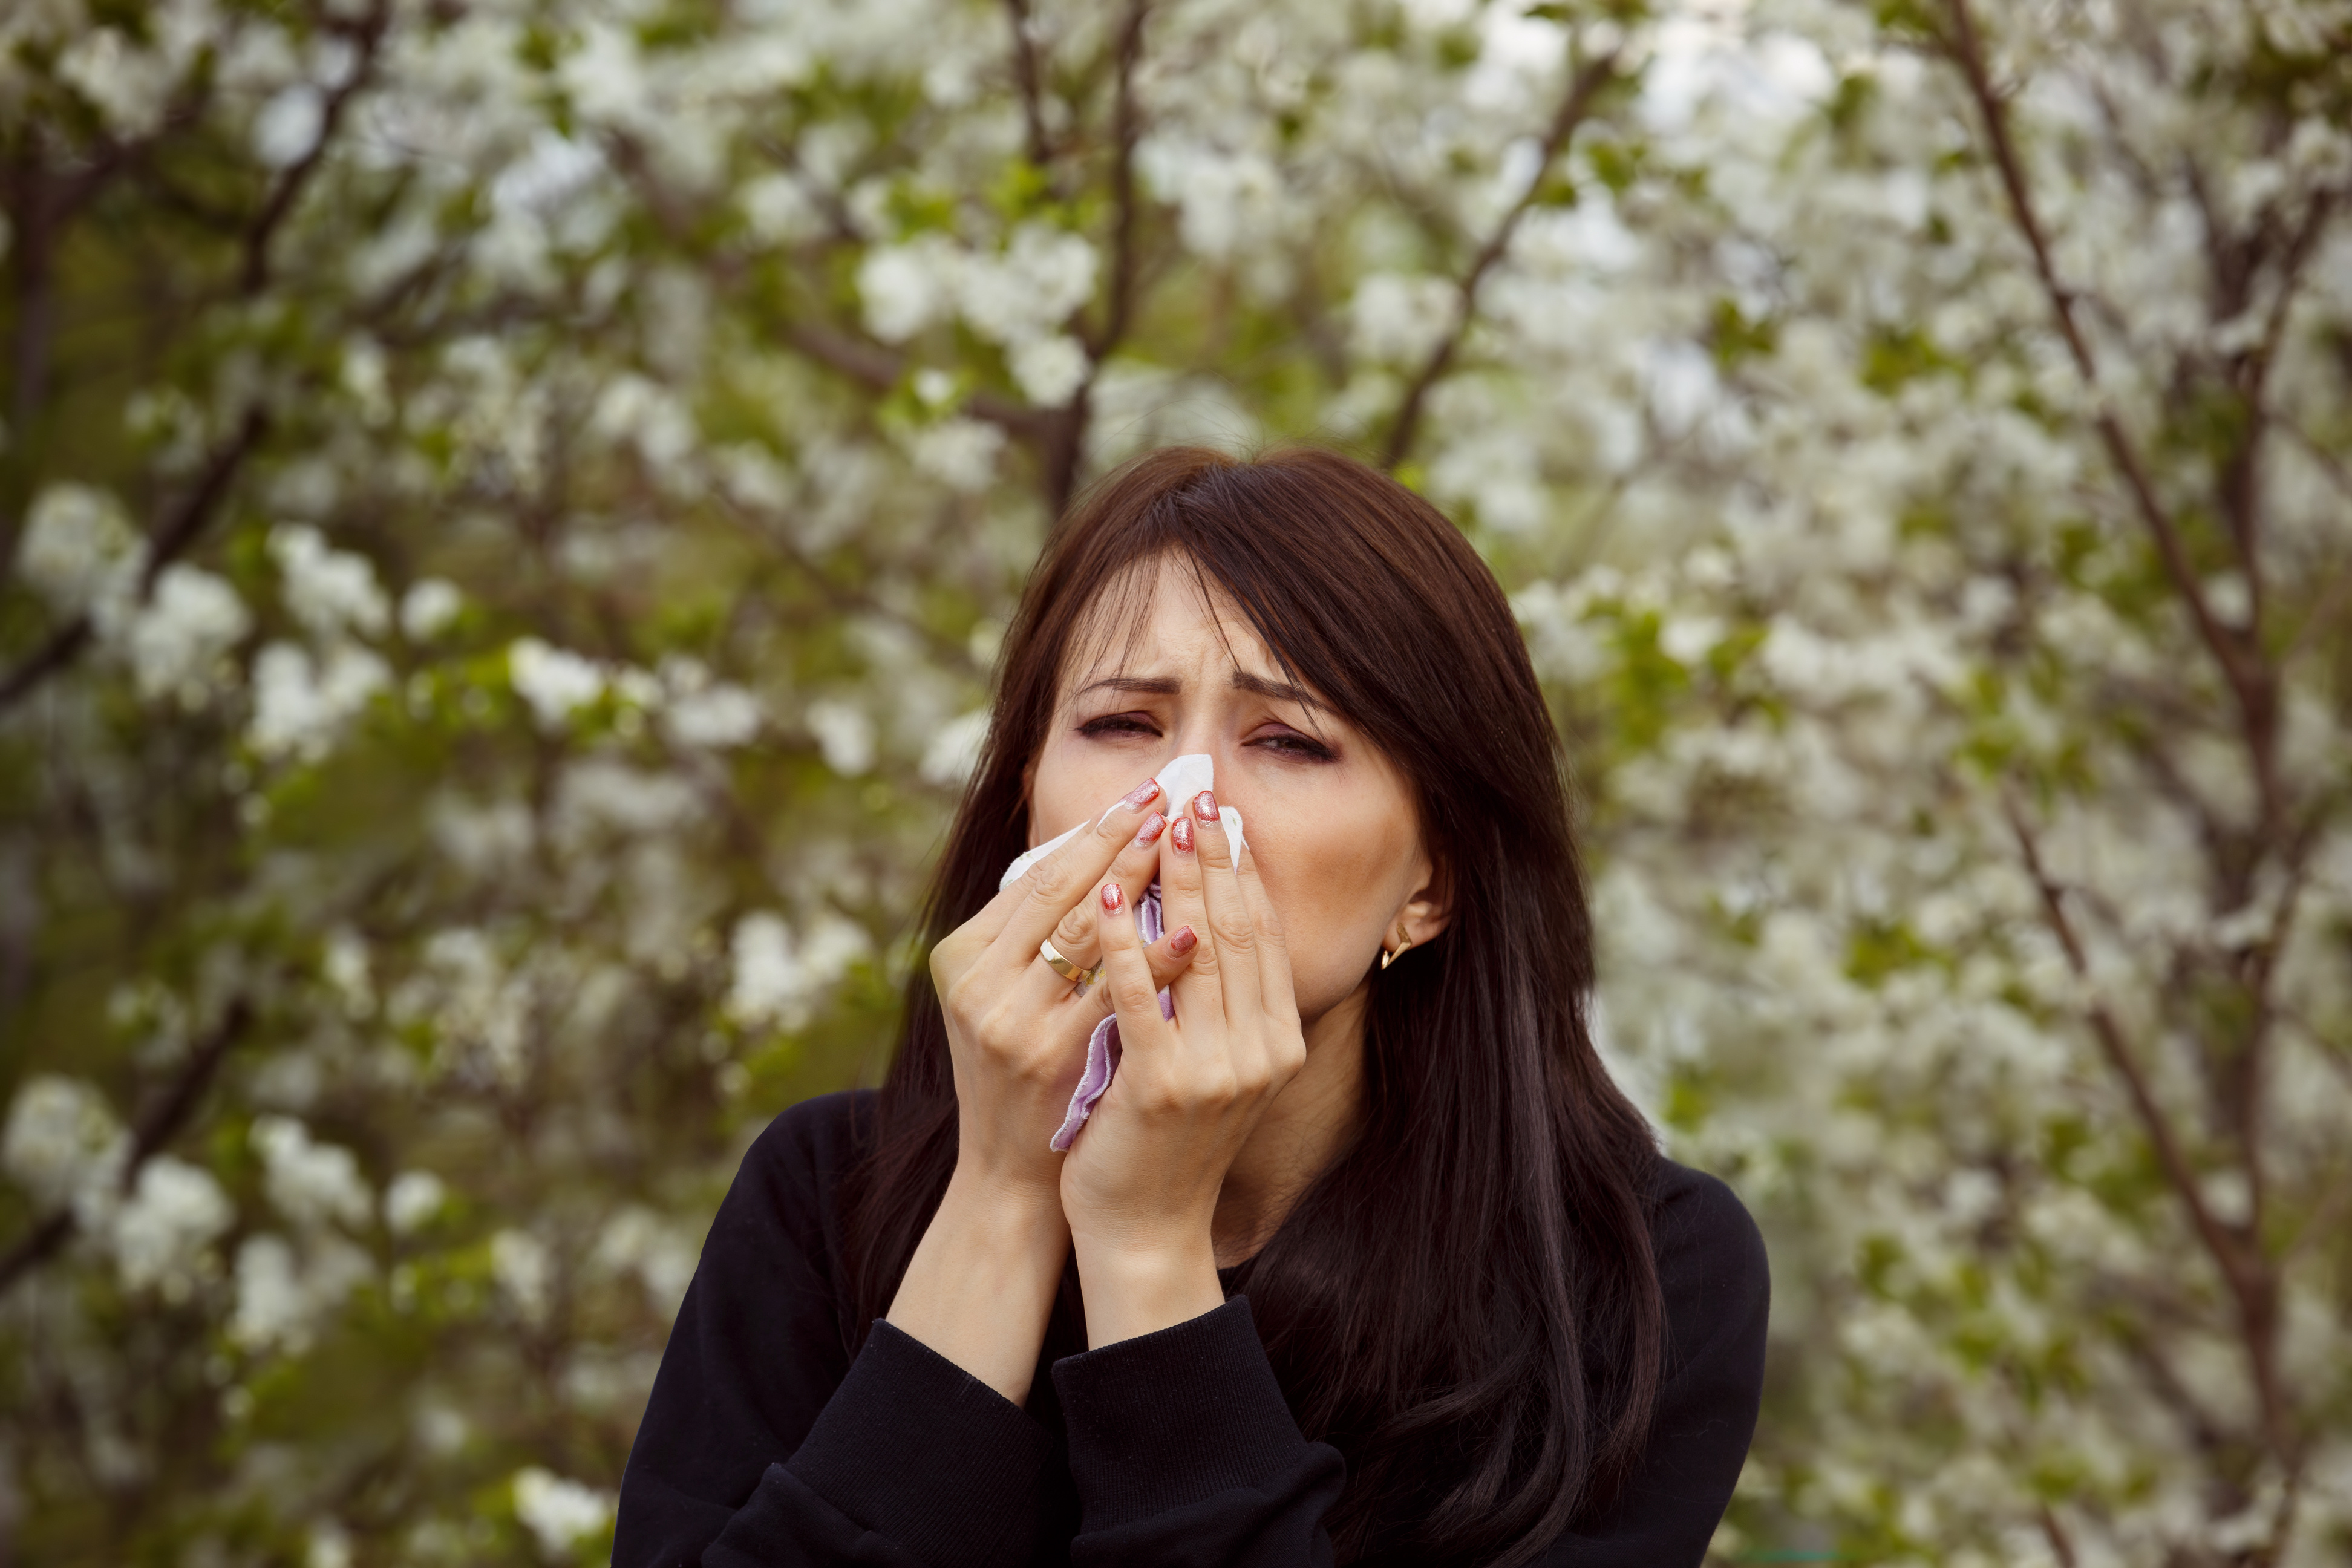 Portrait of sick sneezing woman at spring outdoors blossoms background.